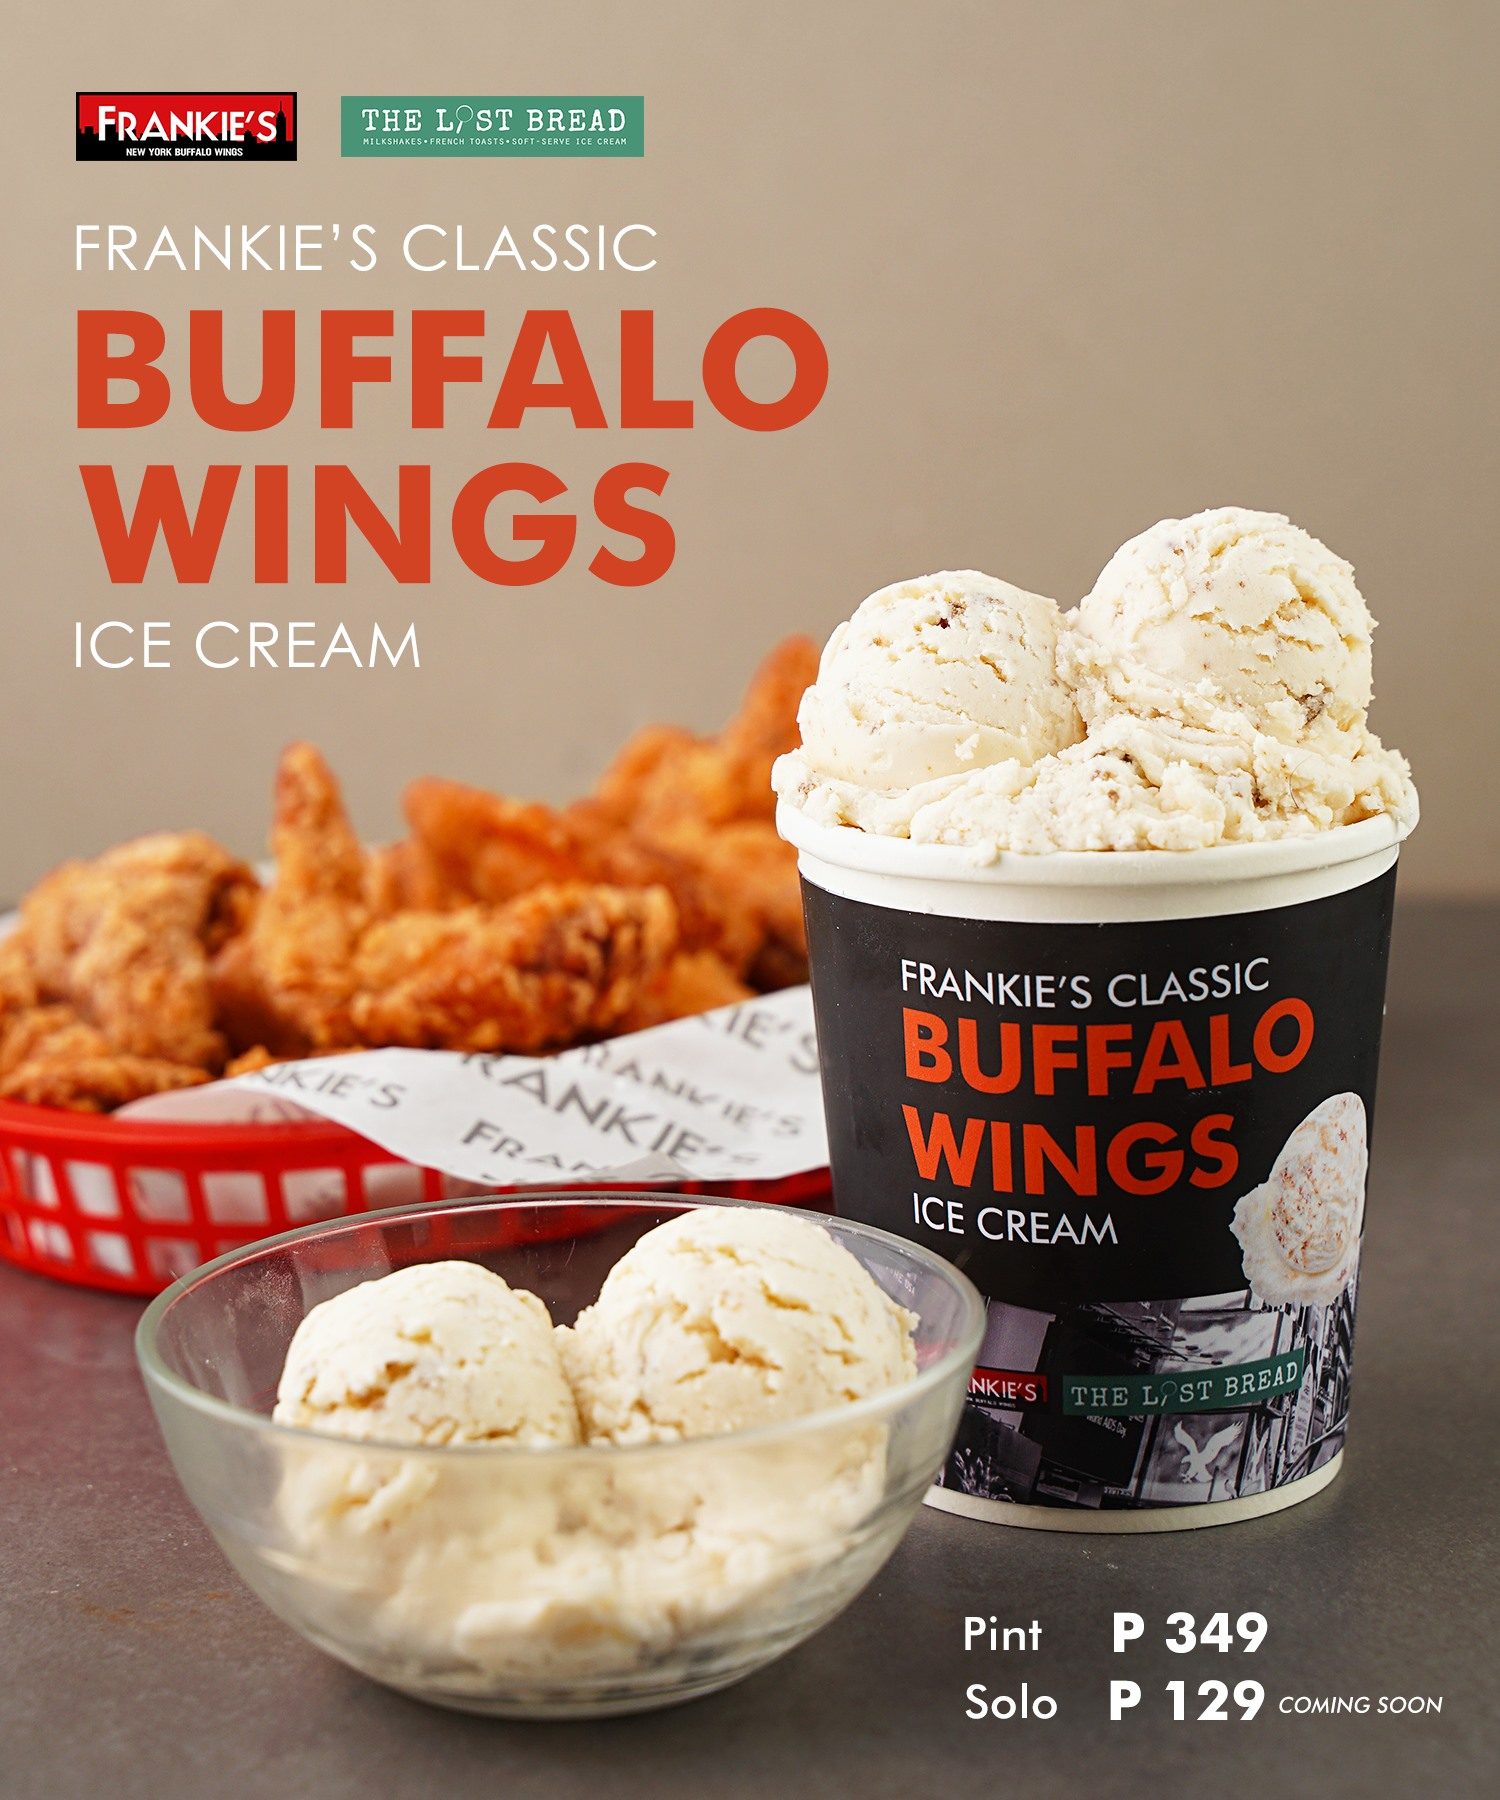 Frankie’s and The Lost Bread collab for buffalo wings-flavored ice cream